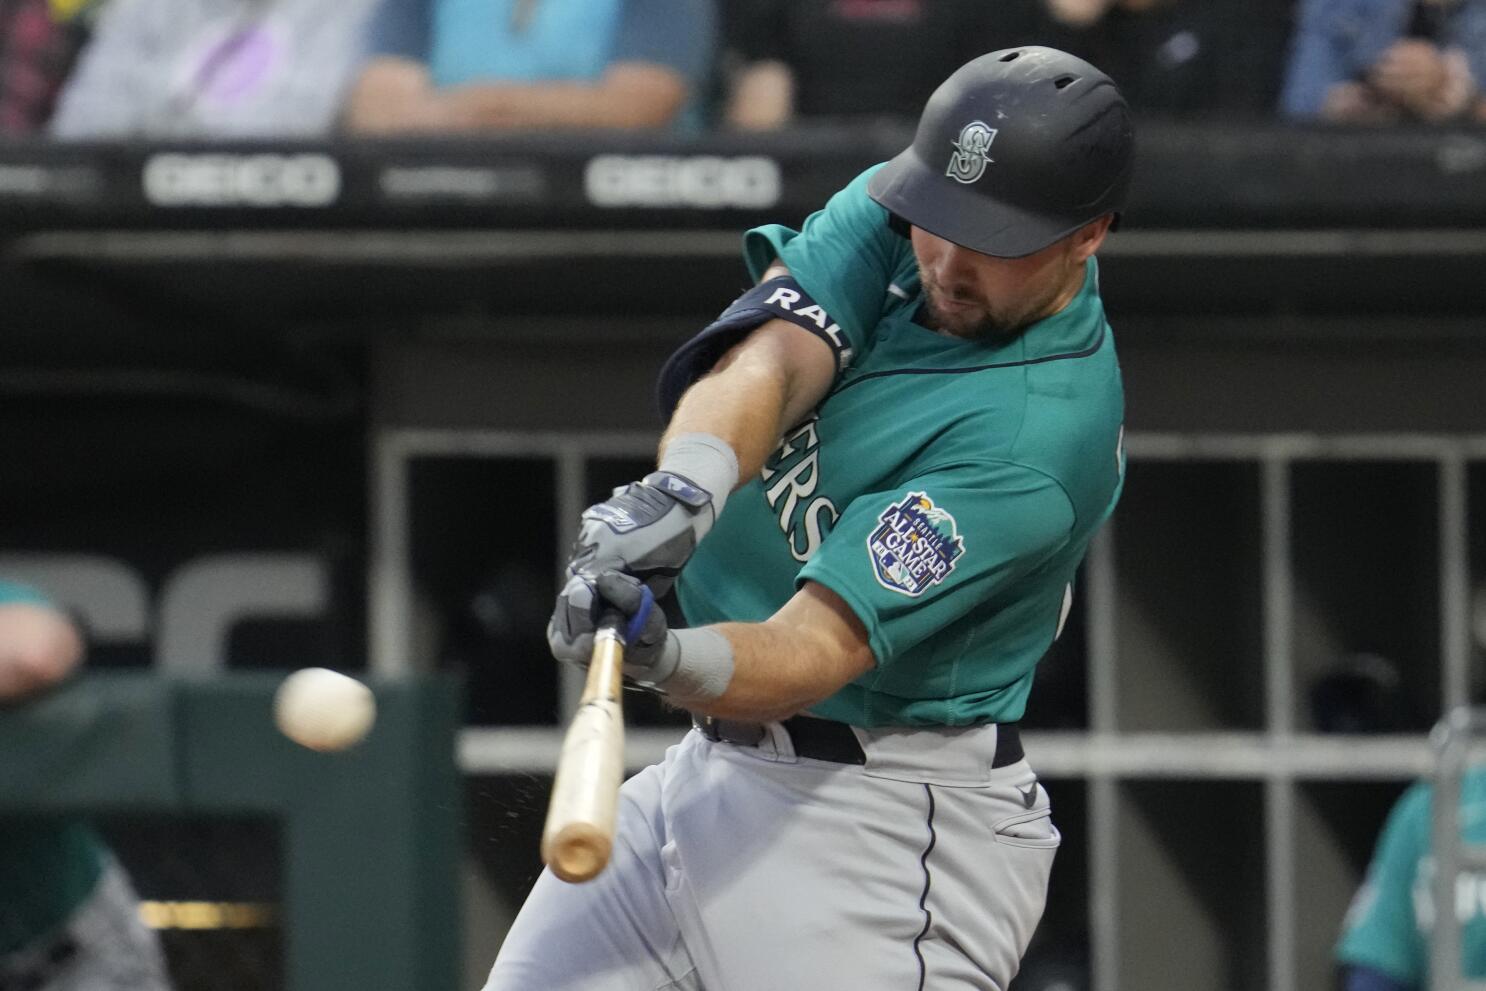 Why Scott Servais is giving Mariners a pass after some recent sloppy play